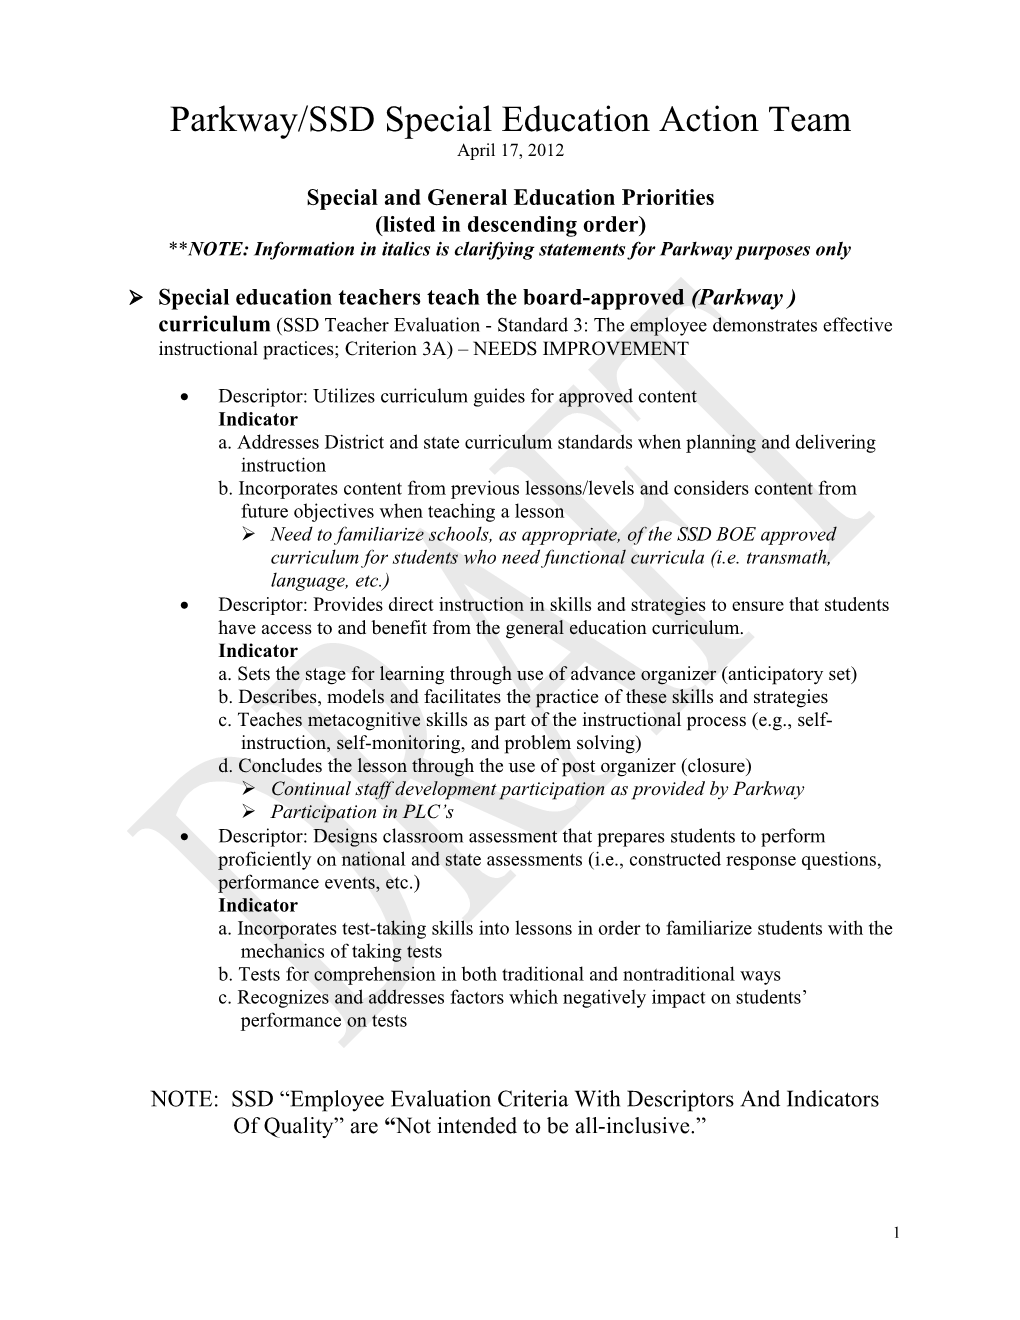 Special and General Education Priorities